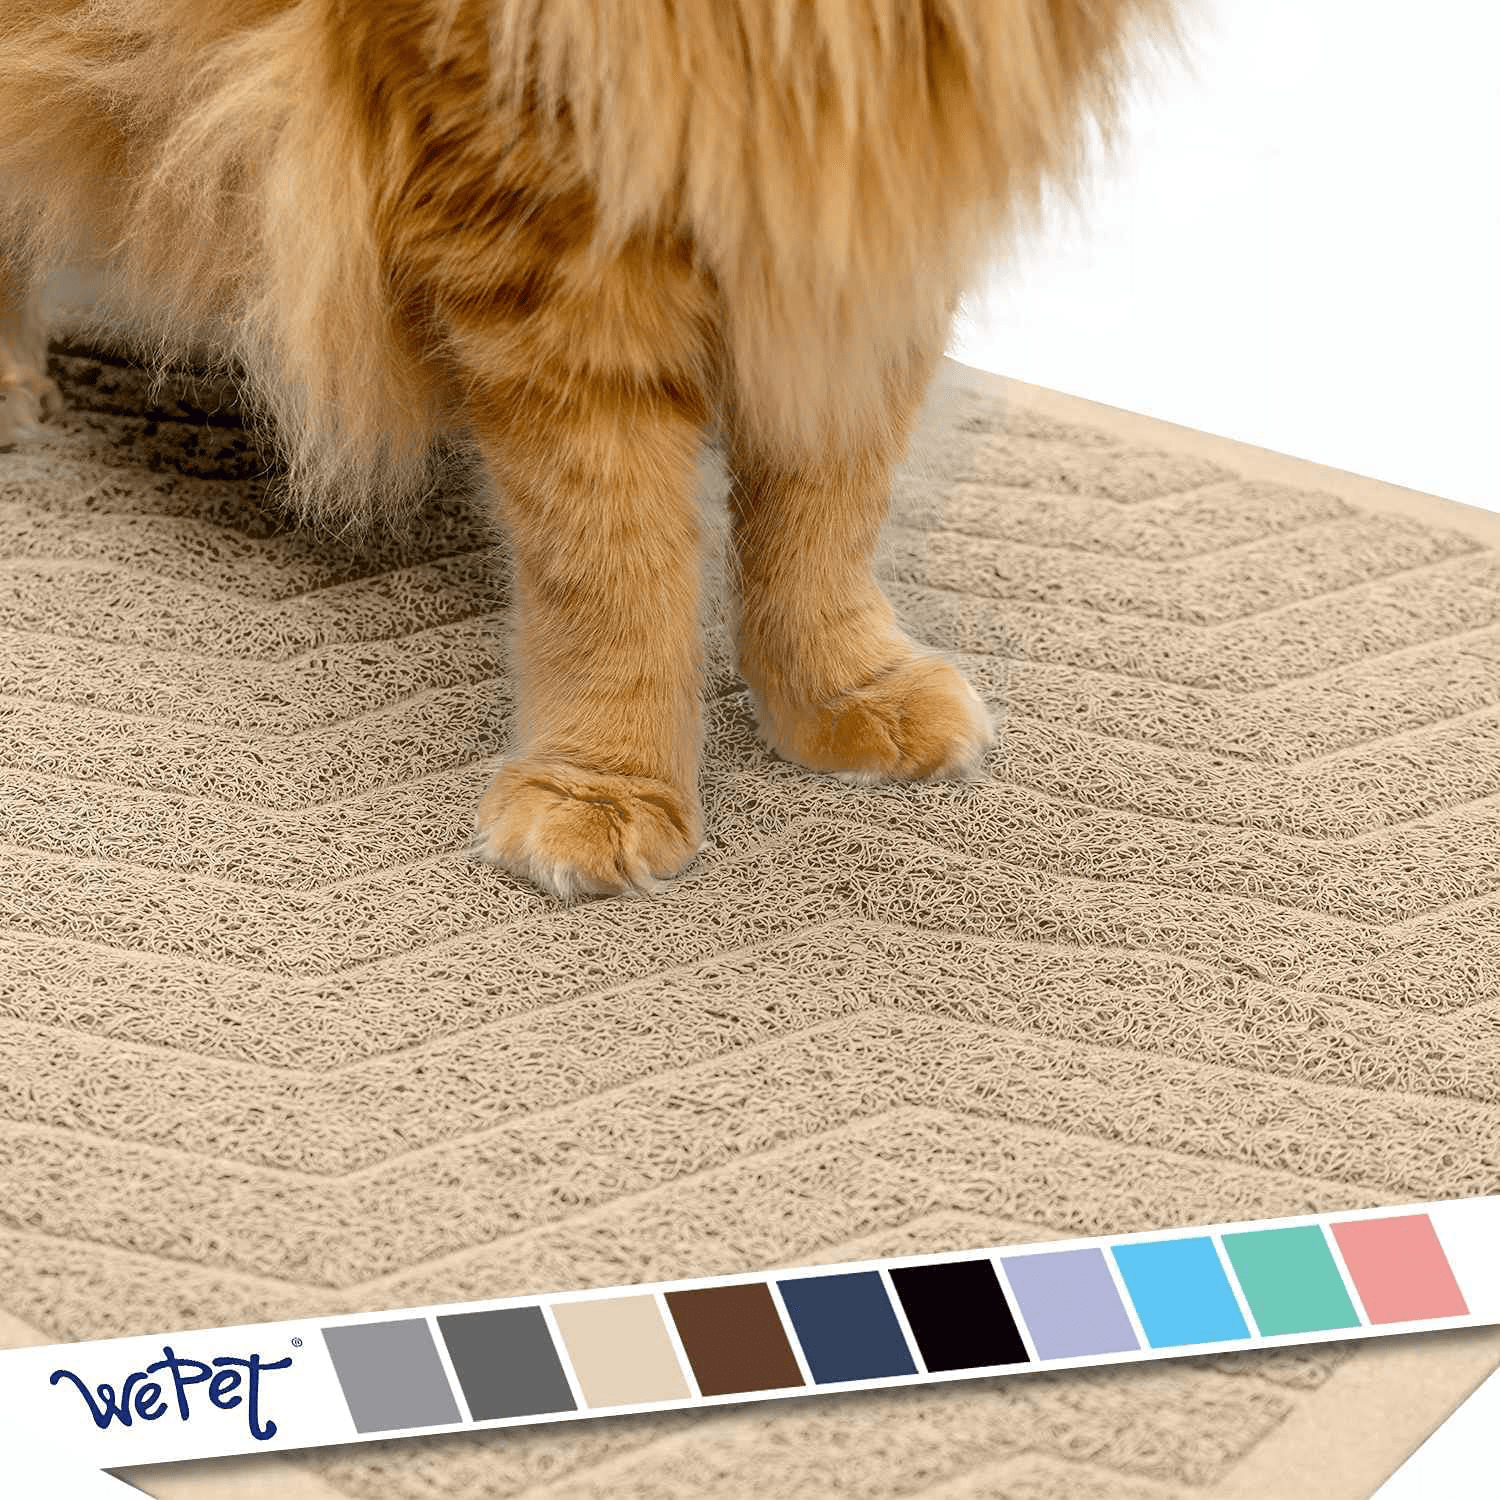 Conlun Cat Litter Mat Cat Litter Trapping Mat,Honeycomb Double Layer  Design,Urine and Water Proof Material,Scatter Control,Less Waste,Easier to  Clean,Washable